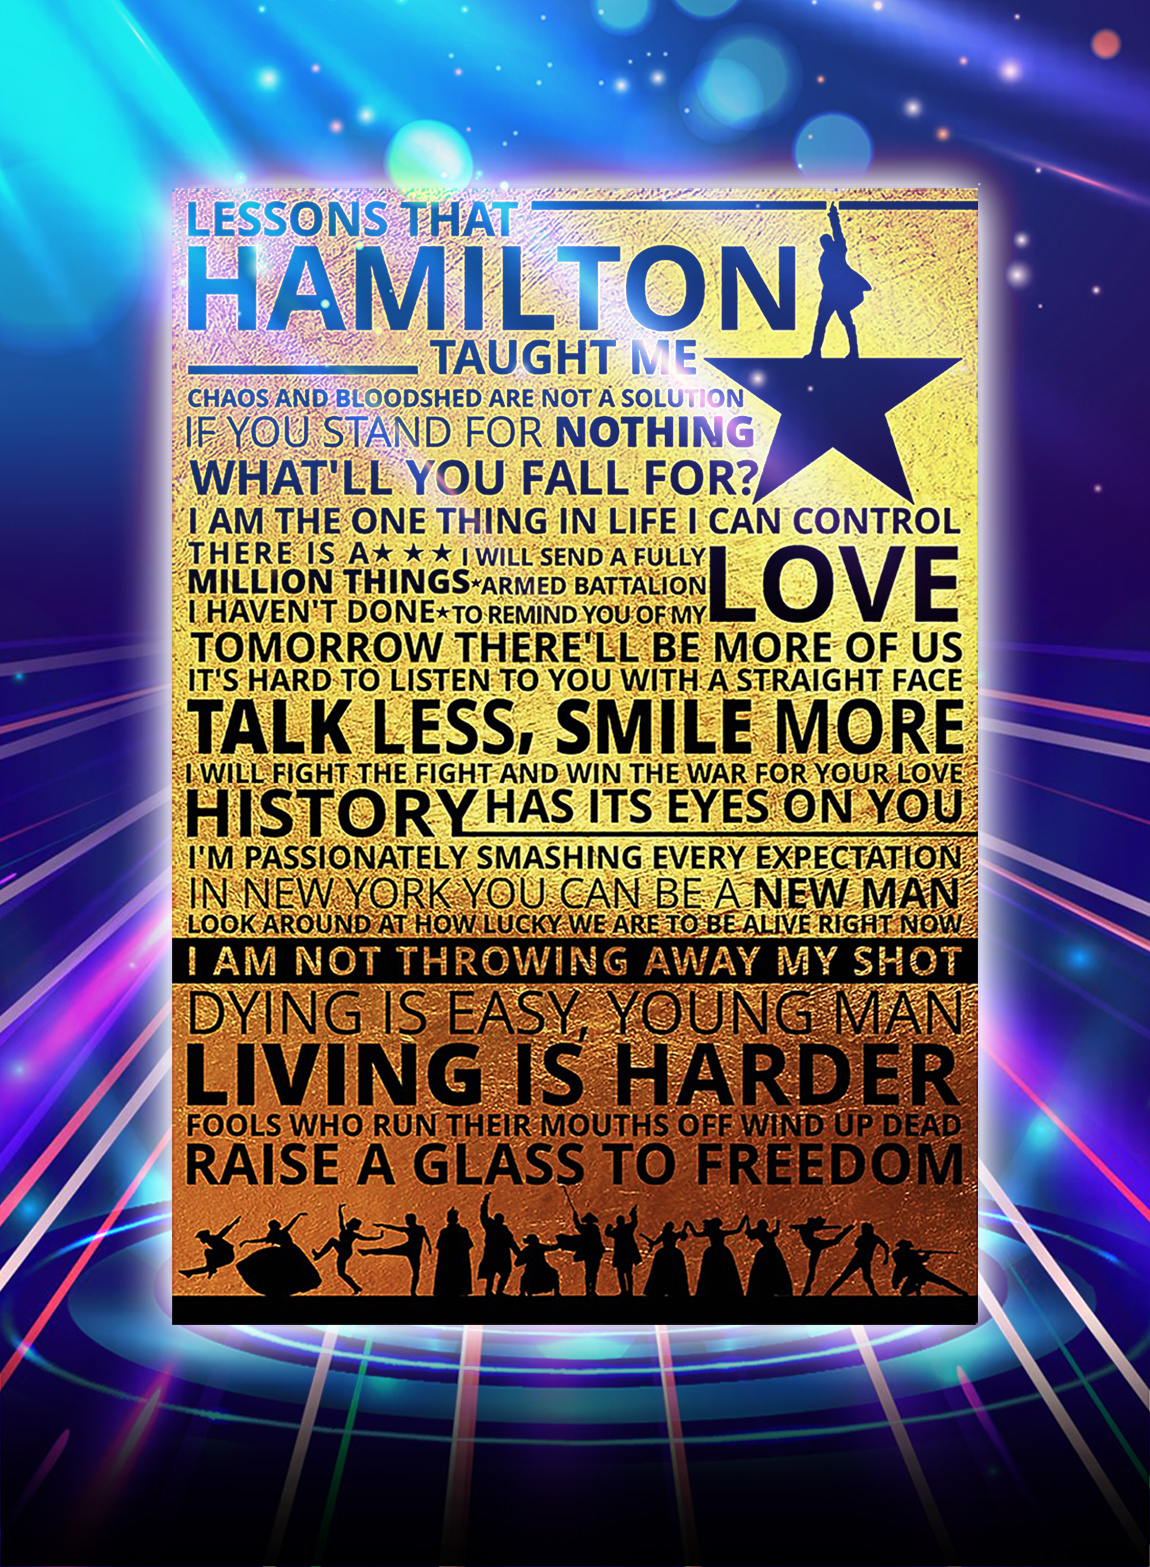 Lessons hamilton taught me poster - A2